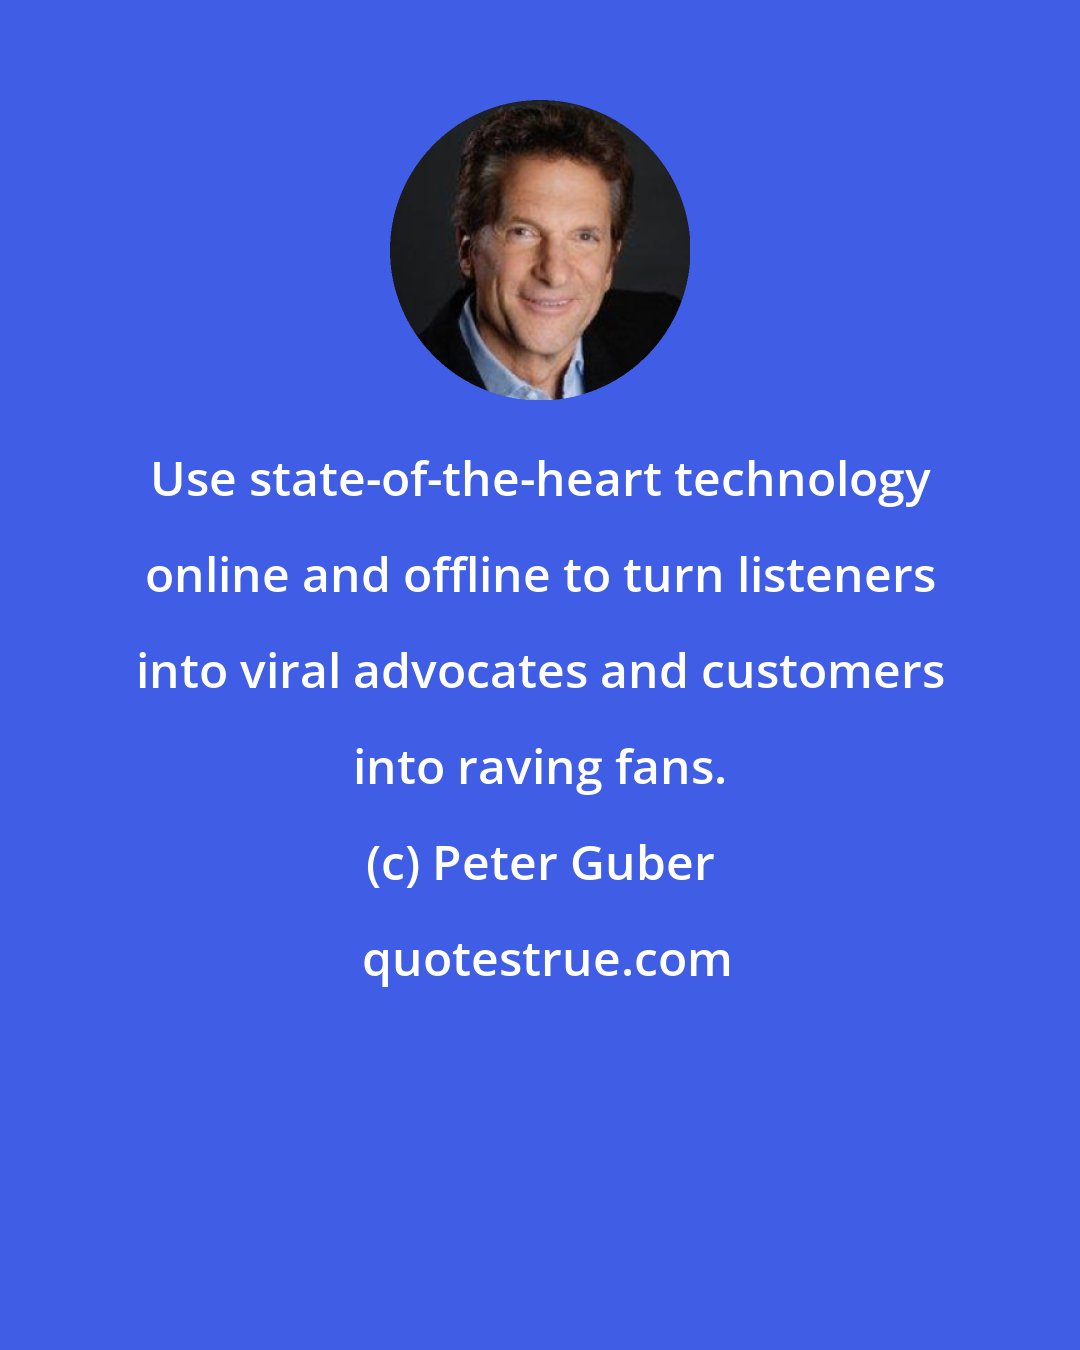 Peter Guber: Use state-of-the-heart technology online and offline to turn listeners into viral advocates and customers into raving fans.